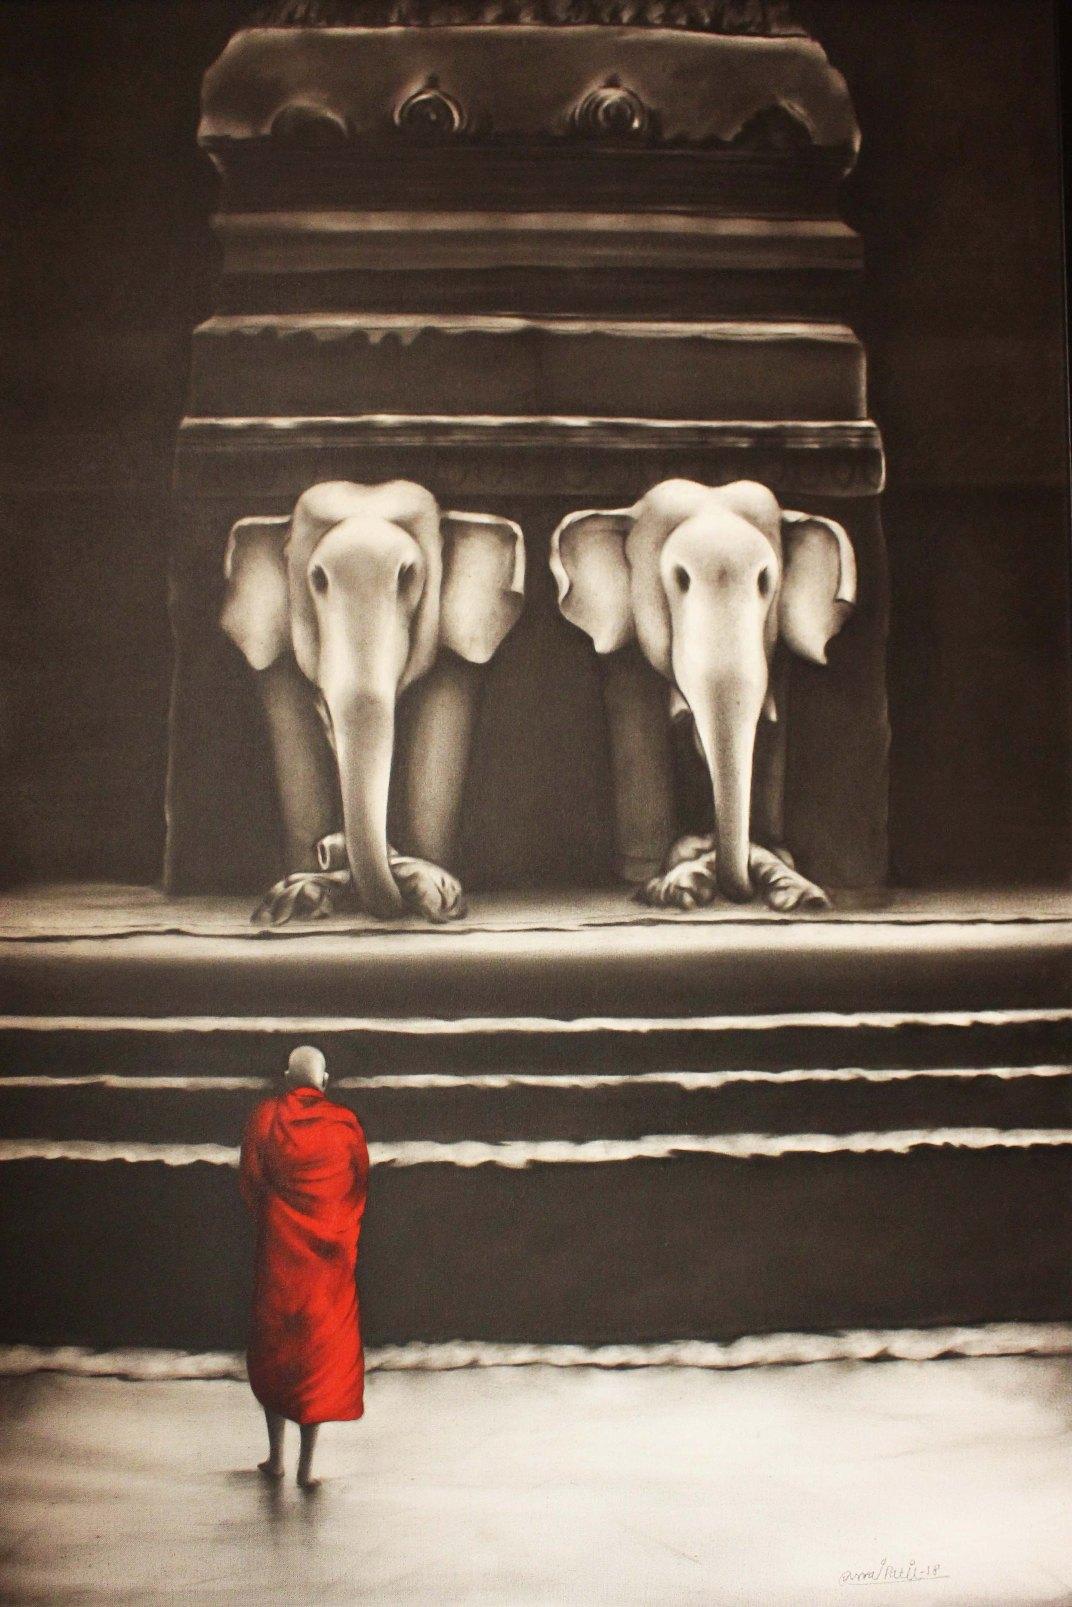 Yuvraj Patil Animal Painting - Monk with Elephant, Charcoal on Canvas by Indian Artist "In Stock"